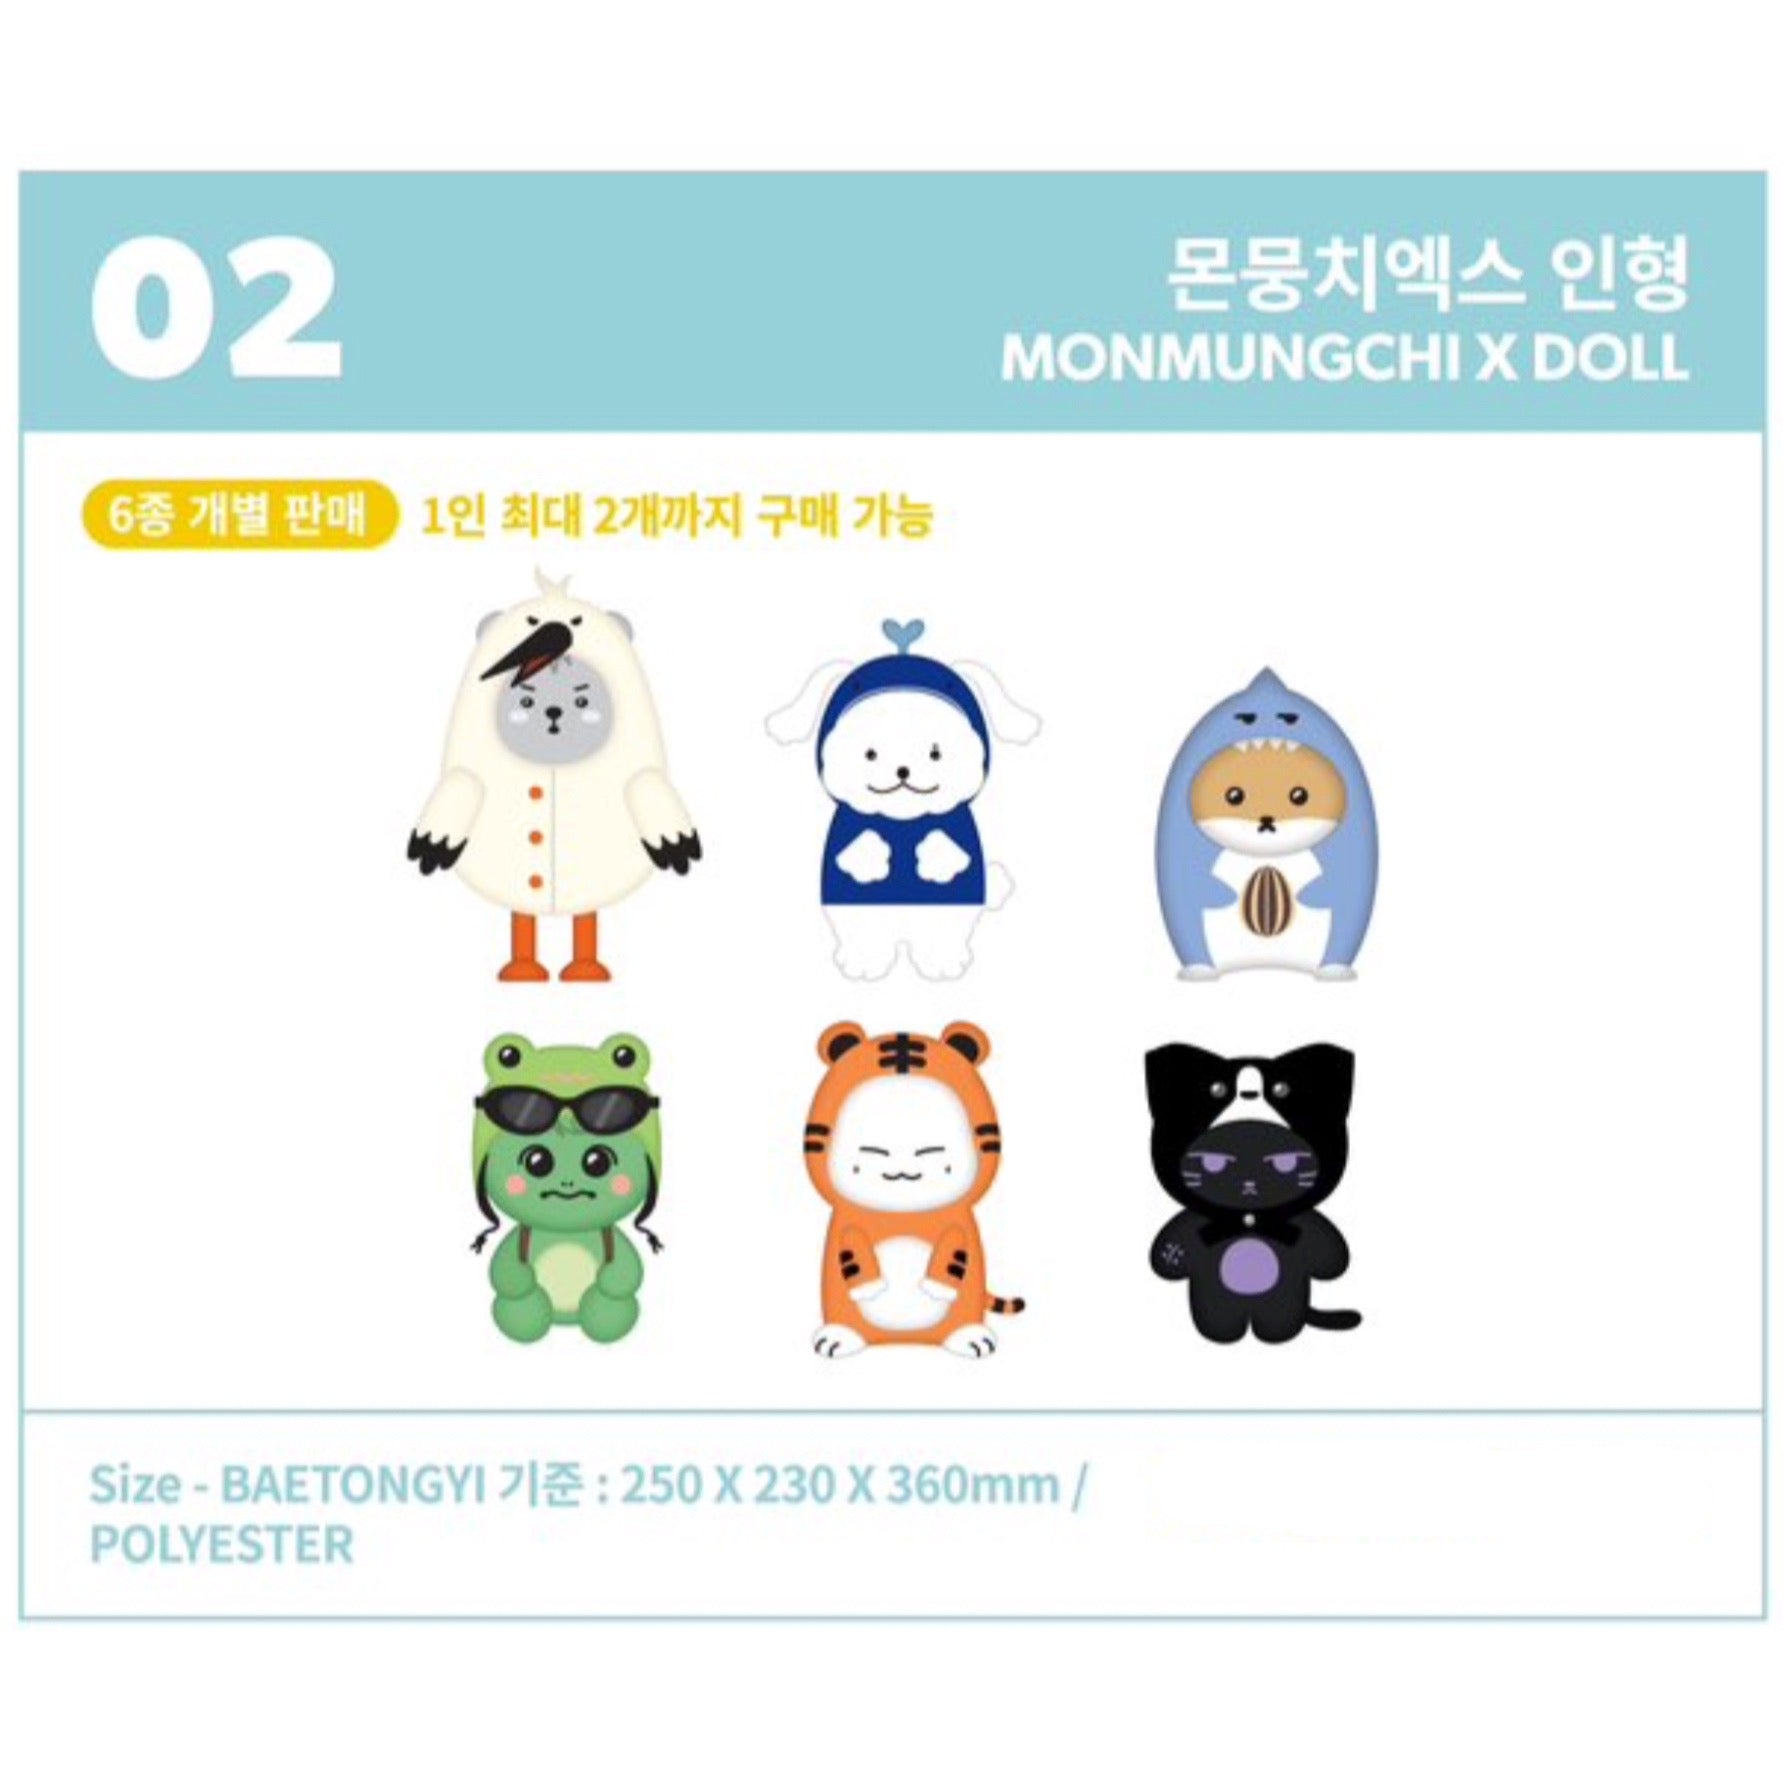 MONSTA X - MONMUNGCHI X : WELCOME PARTY Pop Up Store Official MD – K-STAR